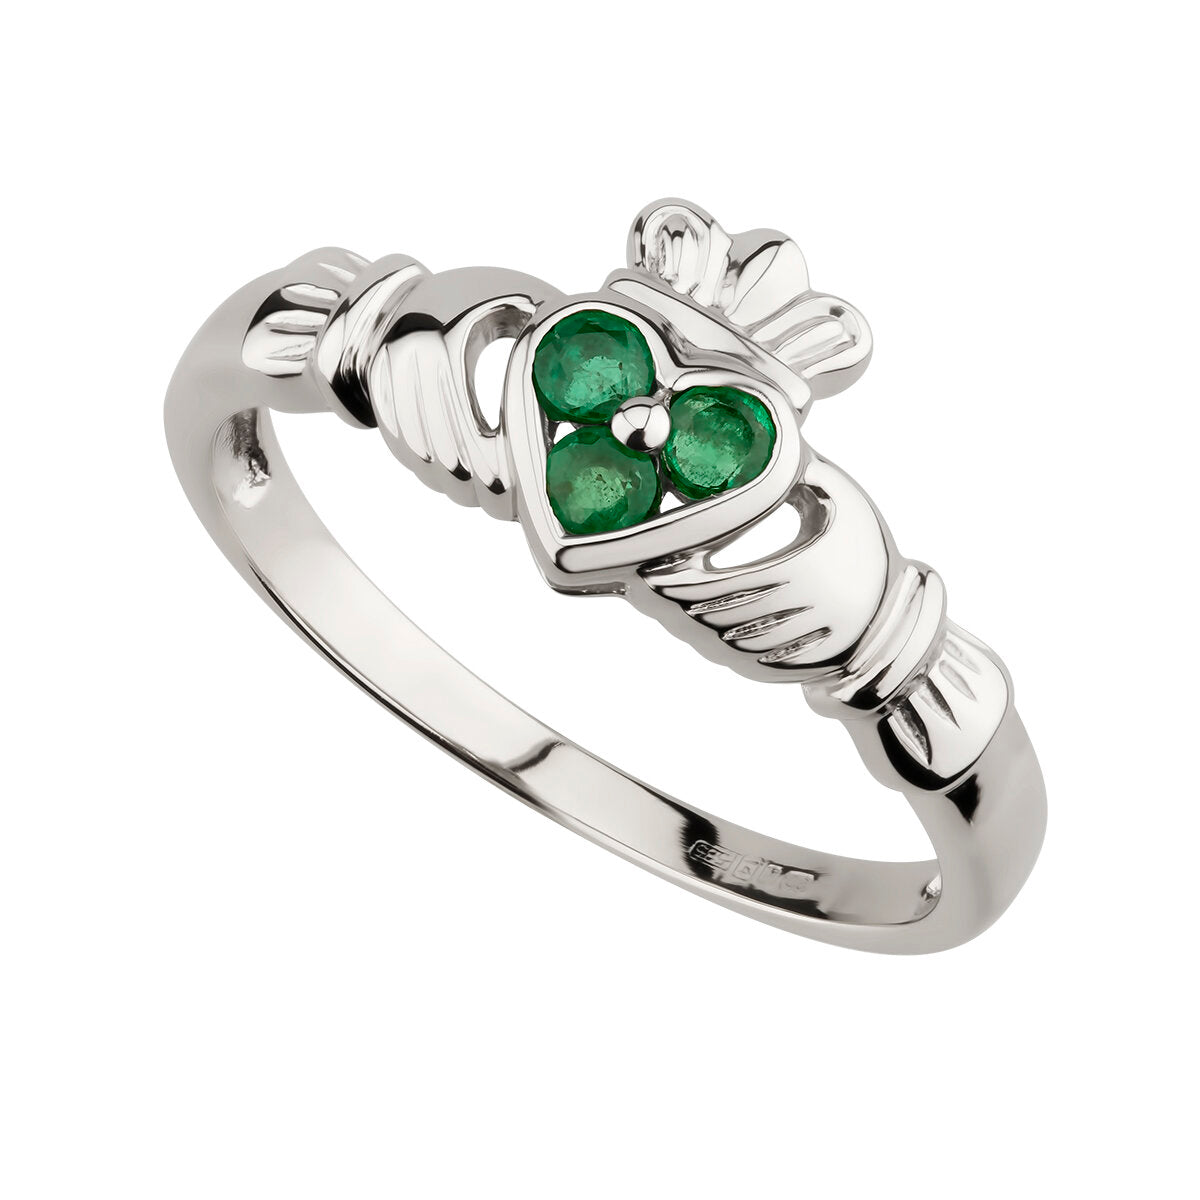 14ct White Gold Emerald Claddagh Ring